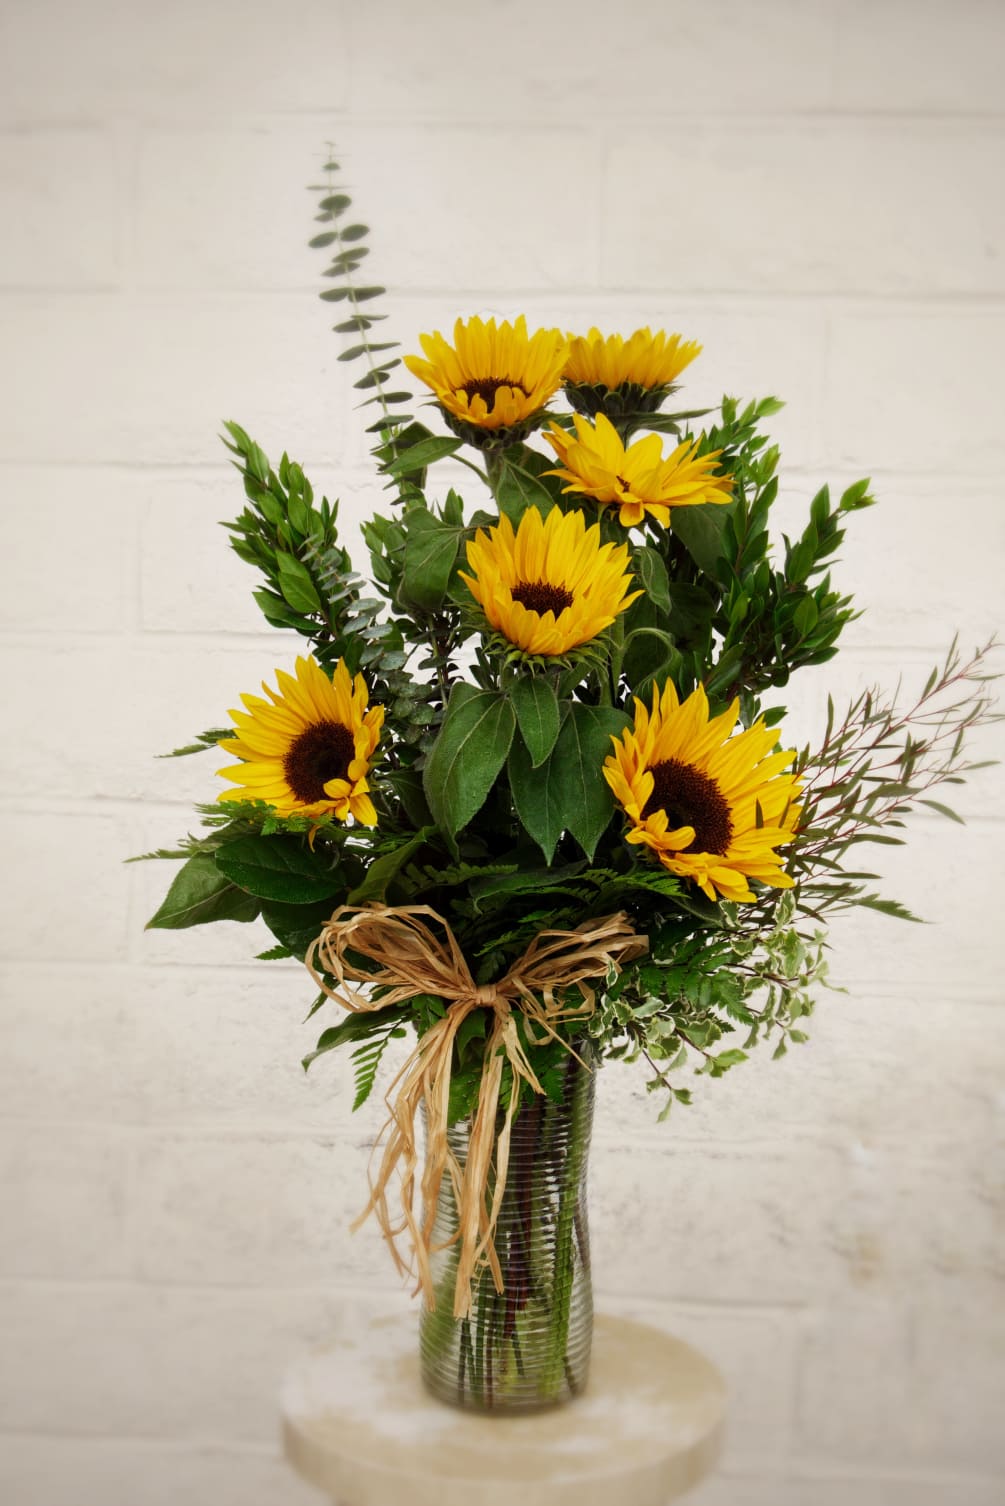 Sunflowers and variety of greens in a tall vase